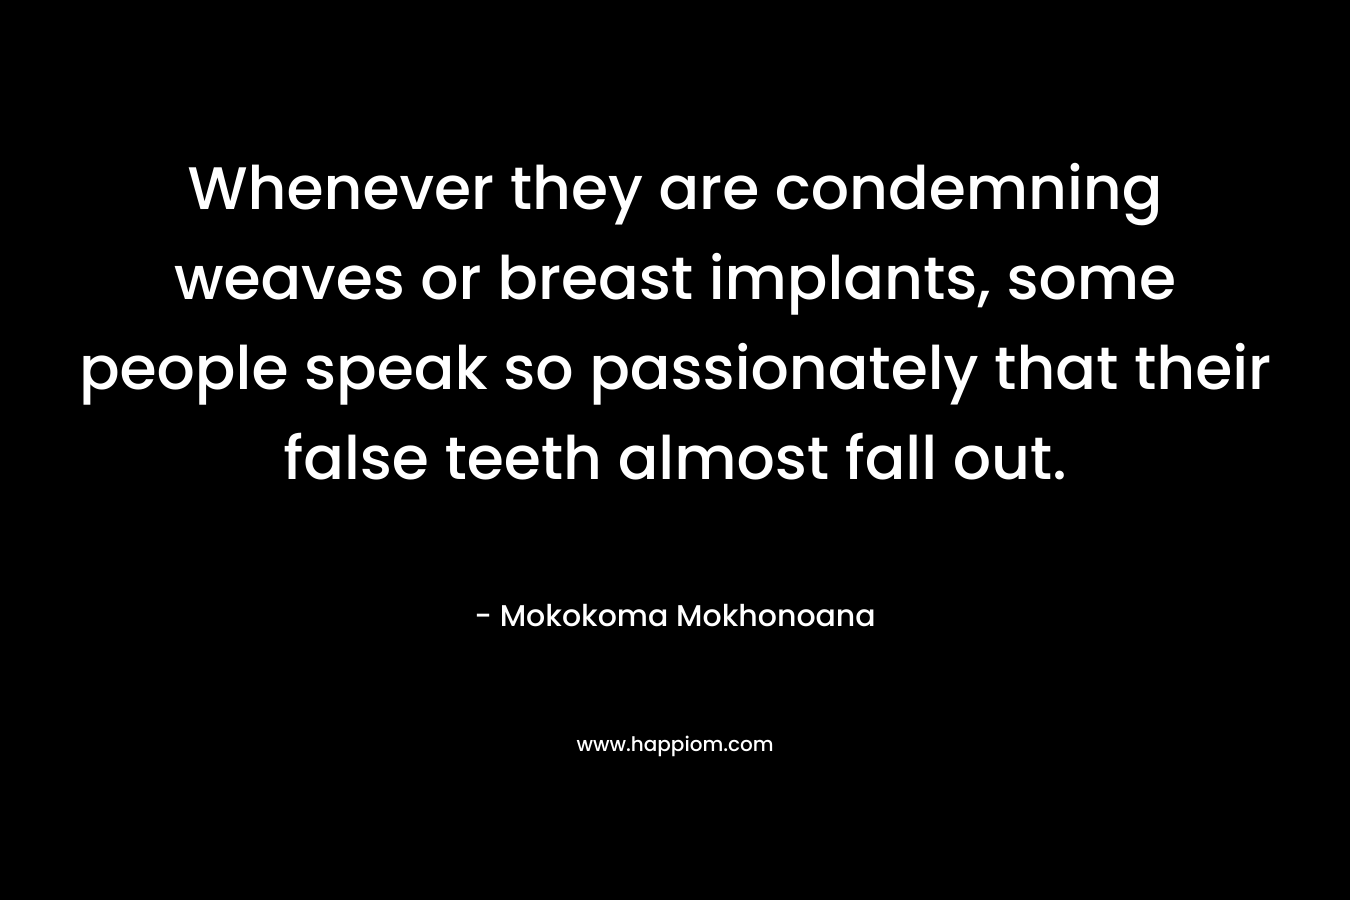 Whenever they are condemning weaves or breast implants, some people speak so passionately that their false teeth almost fall out. – Mokokoma Mokhonoana